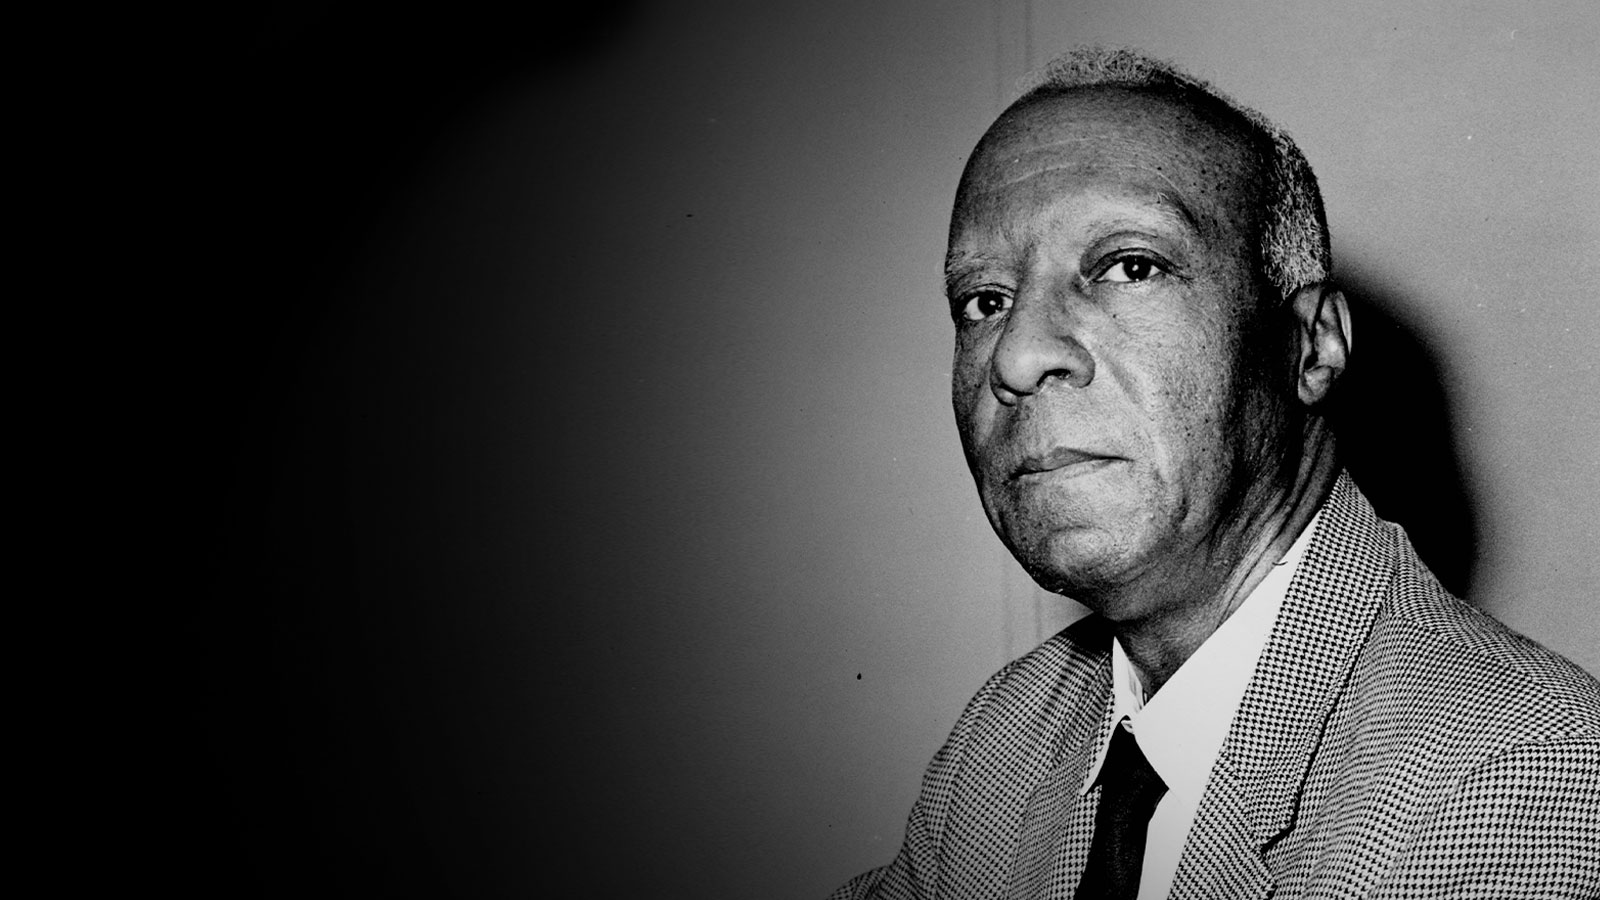 Vantage Point: The State of Black Labor in the U.S. – Tribute to A. Philip Randolph